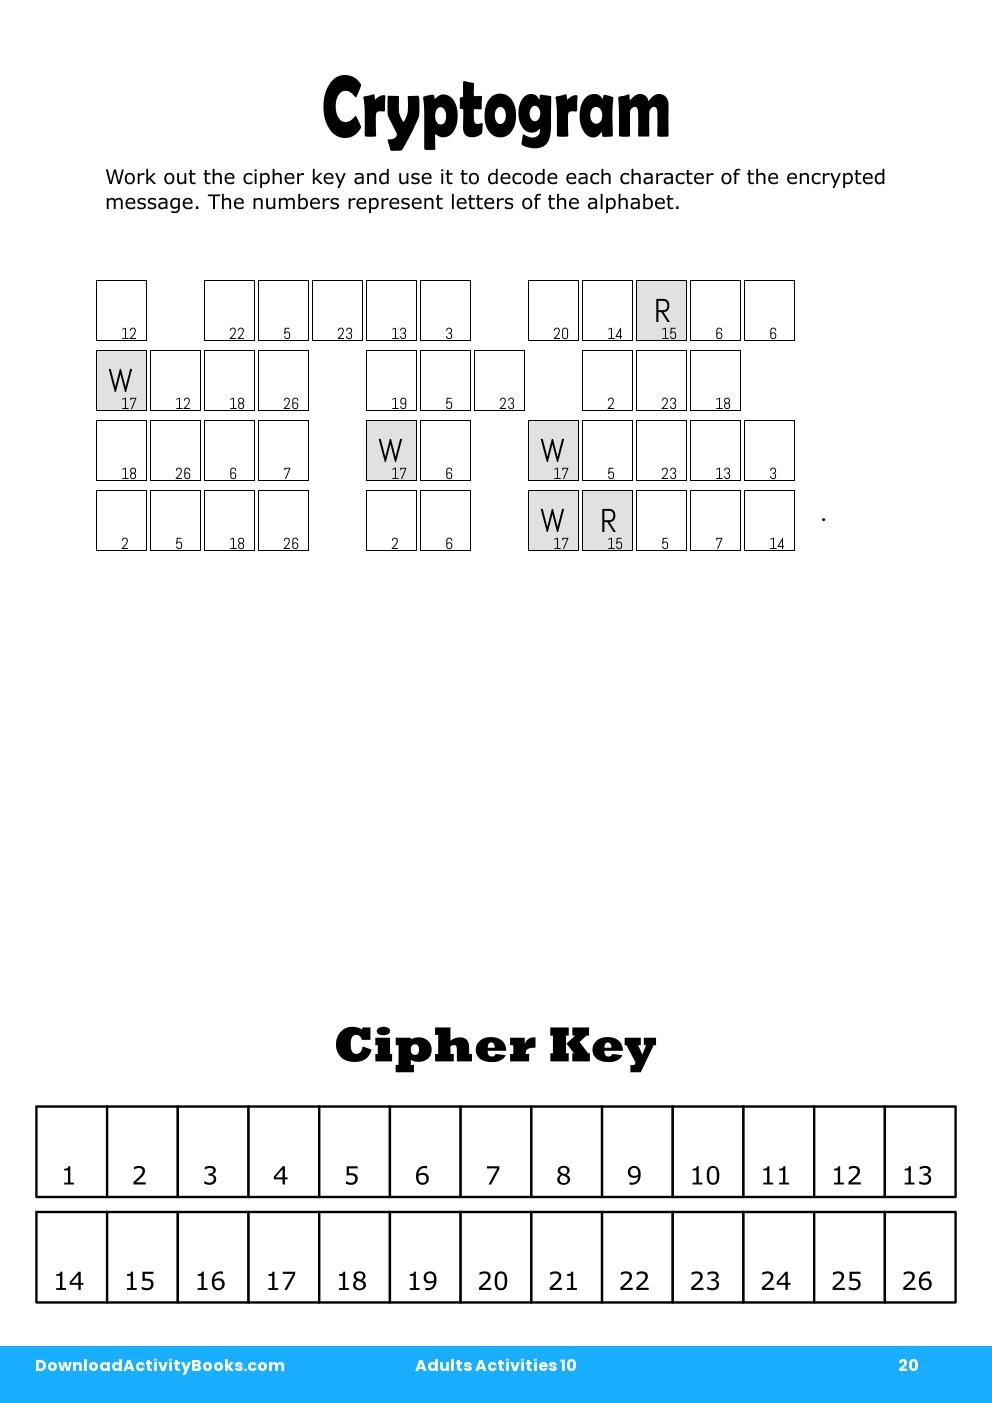 Cryptogram in Adults Activities 10